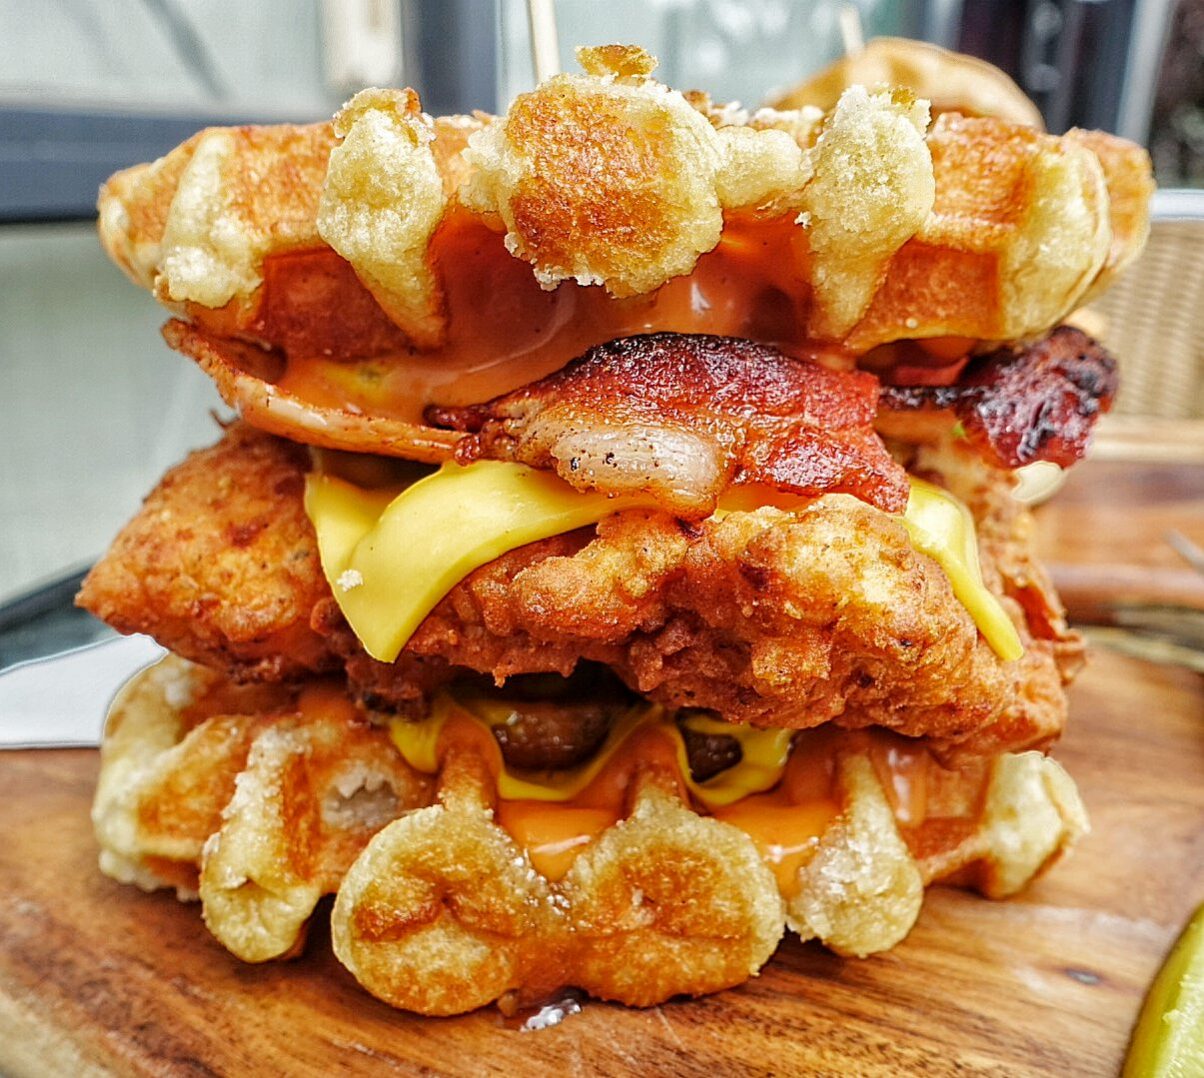 Waffle Burger from Cafe 51 in Melbourne, Australia